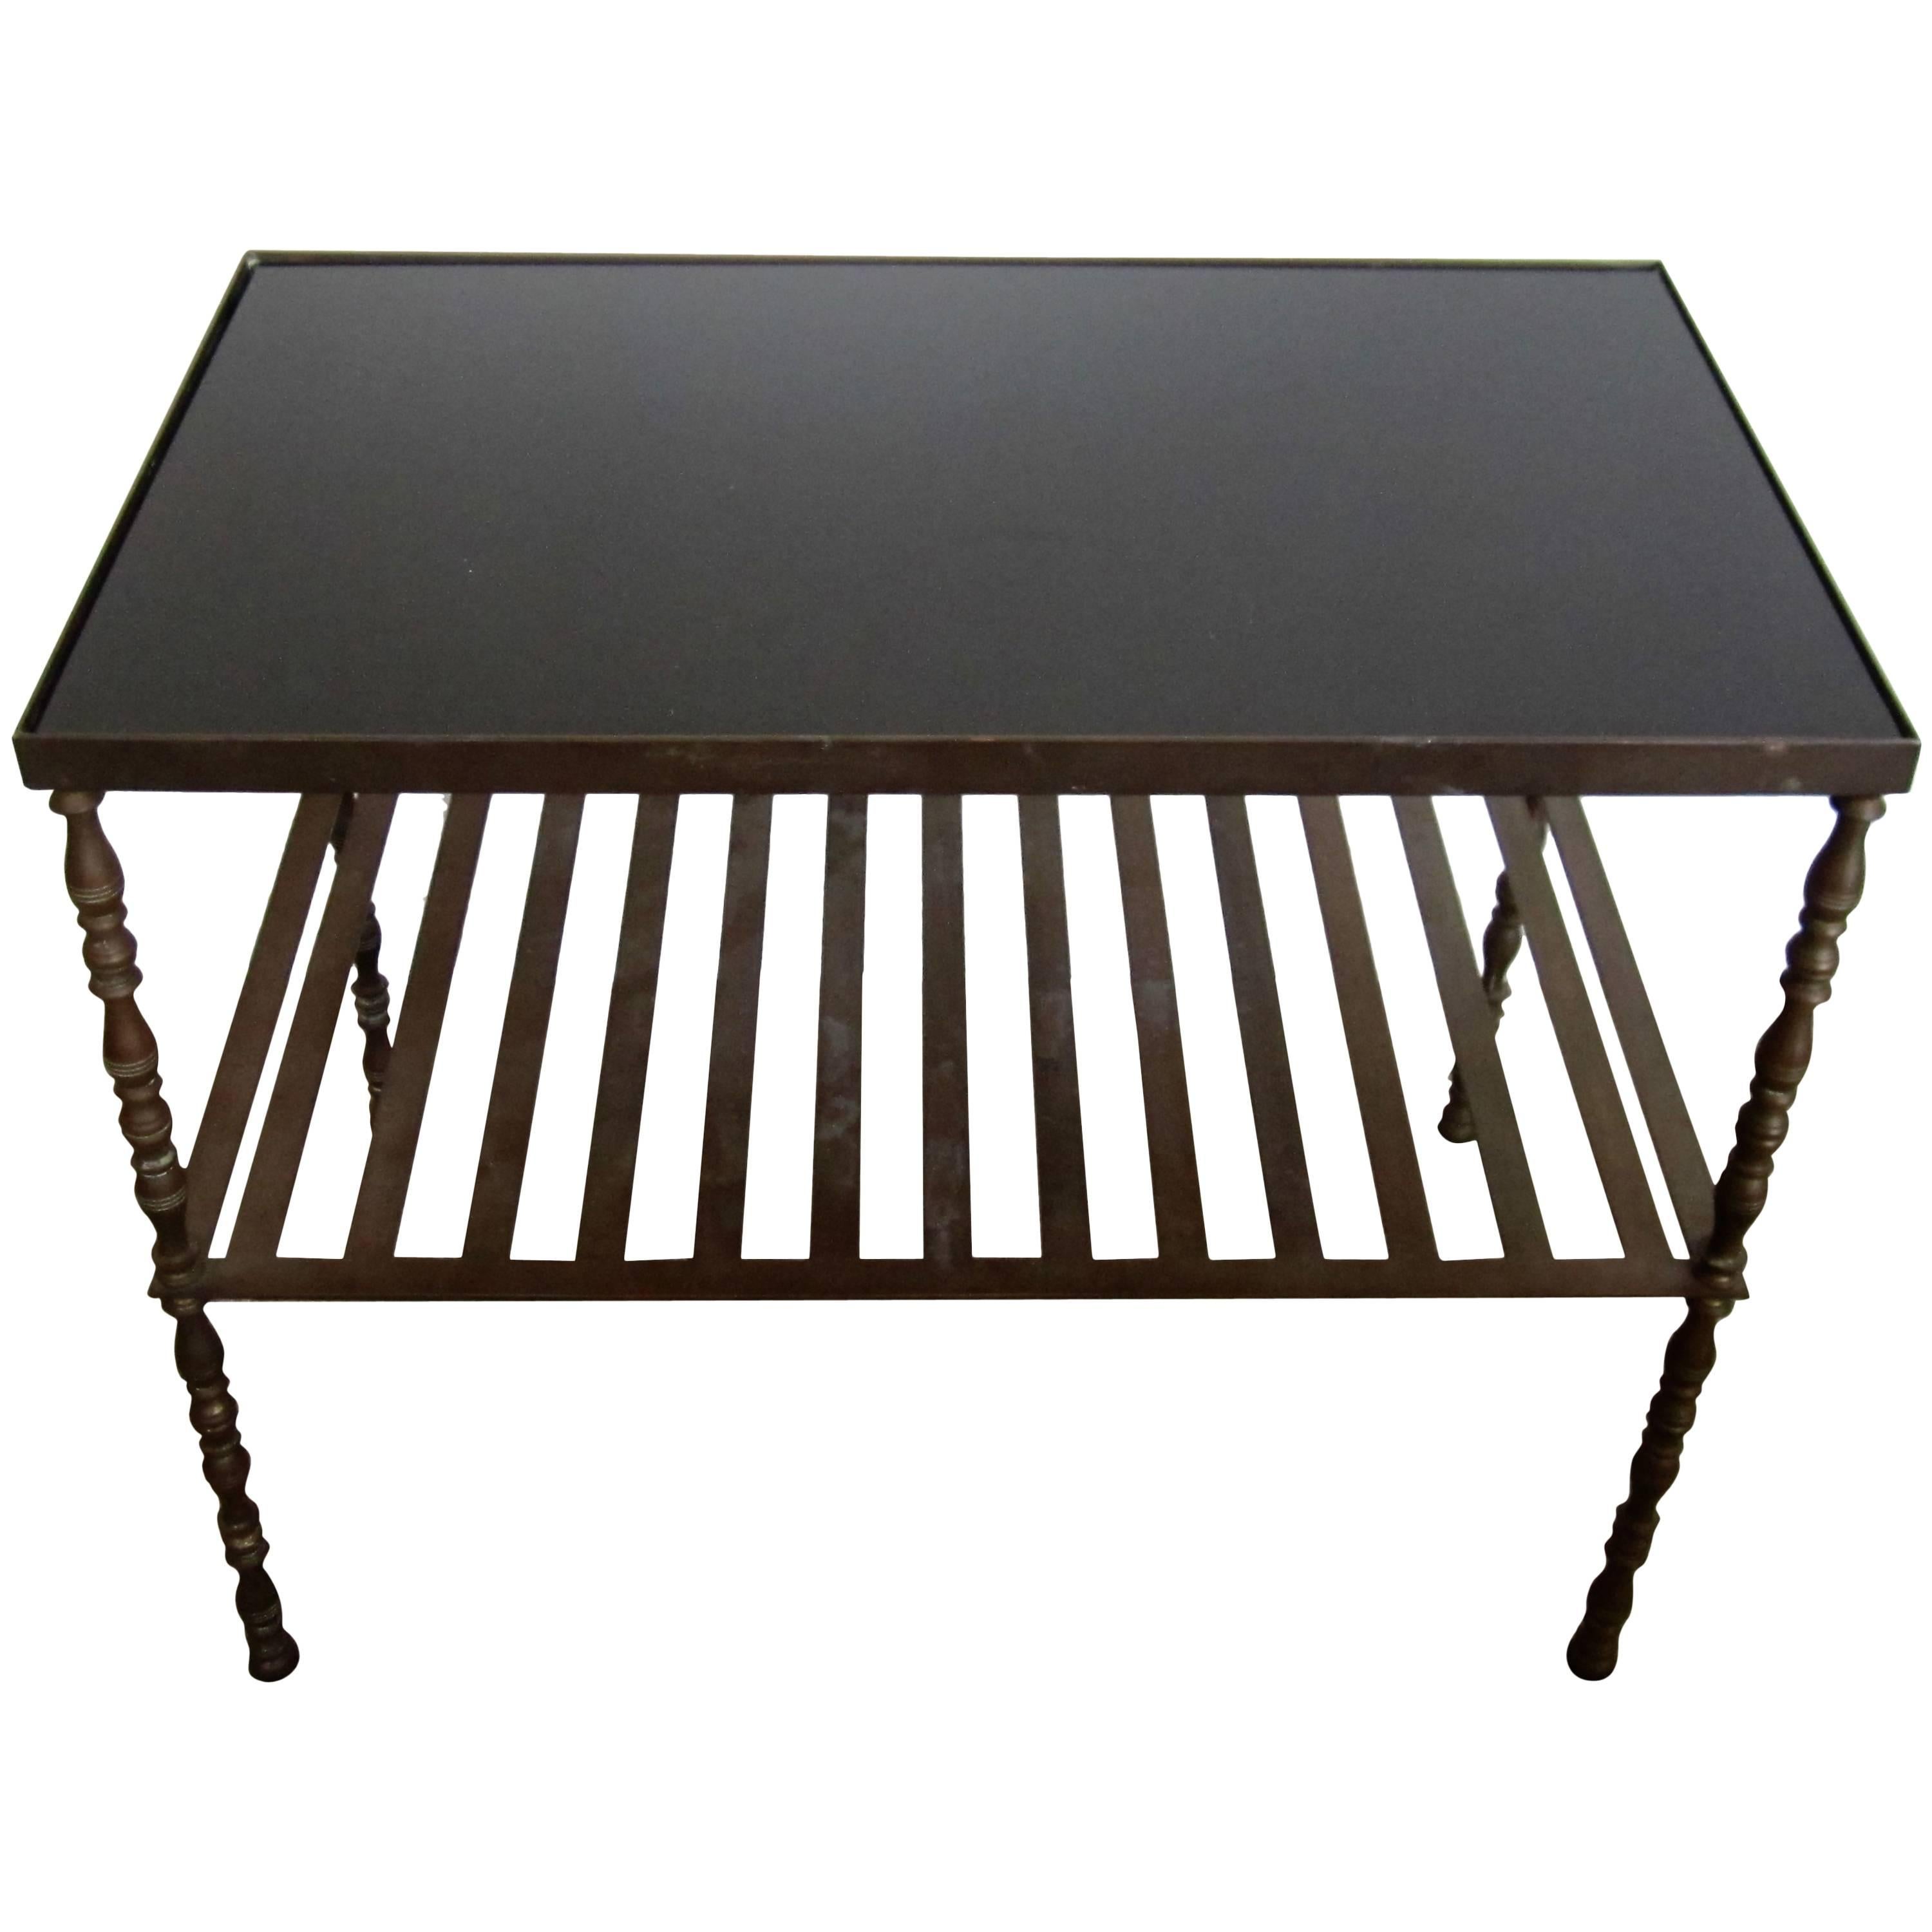 Vintage Bronze and Black Glass Top Bookcase, Bar or End Table, French